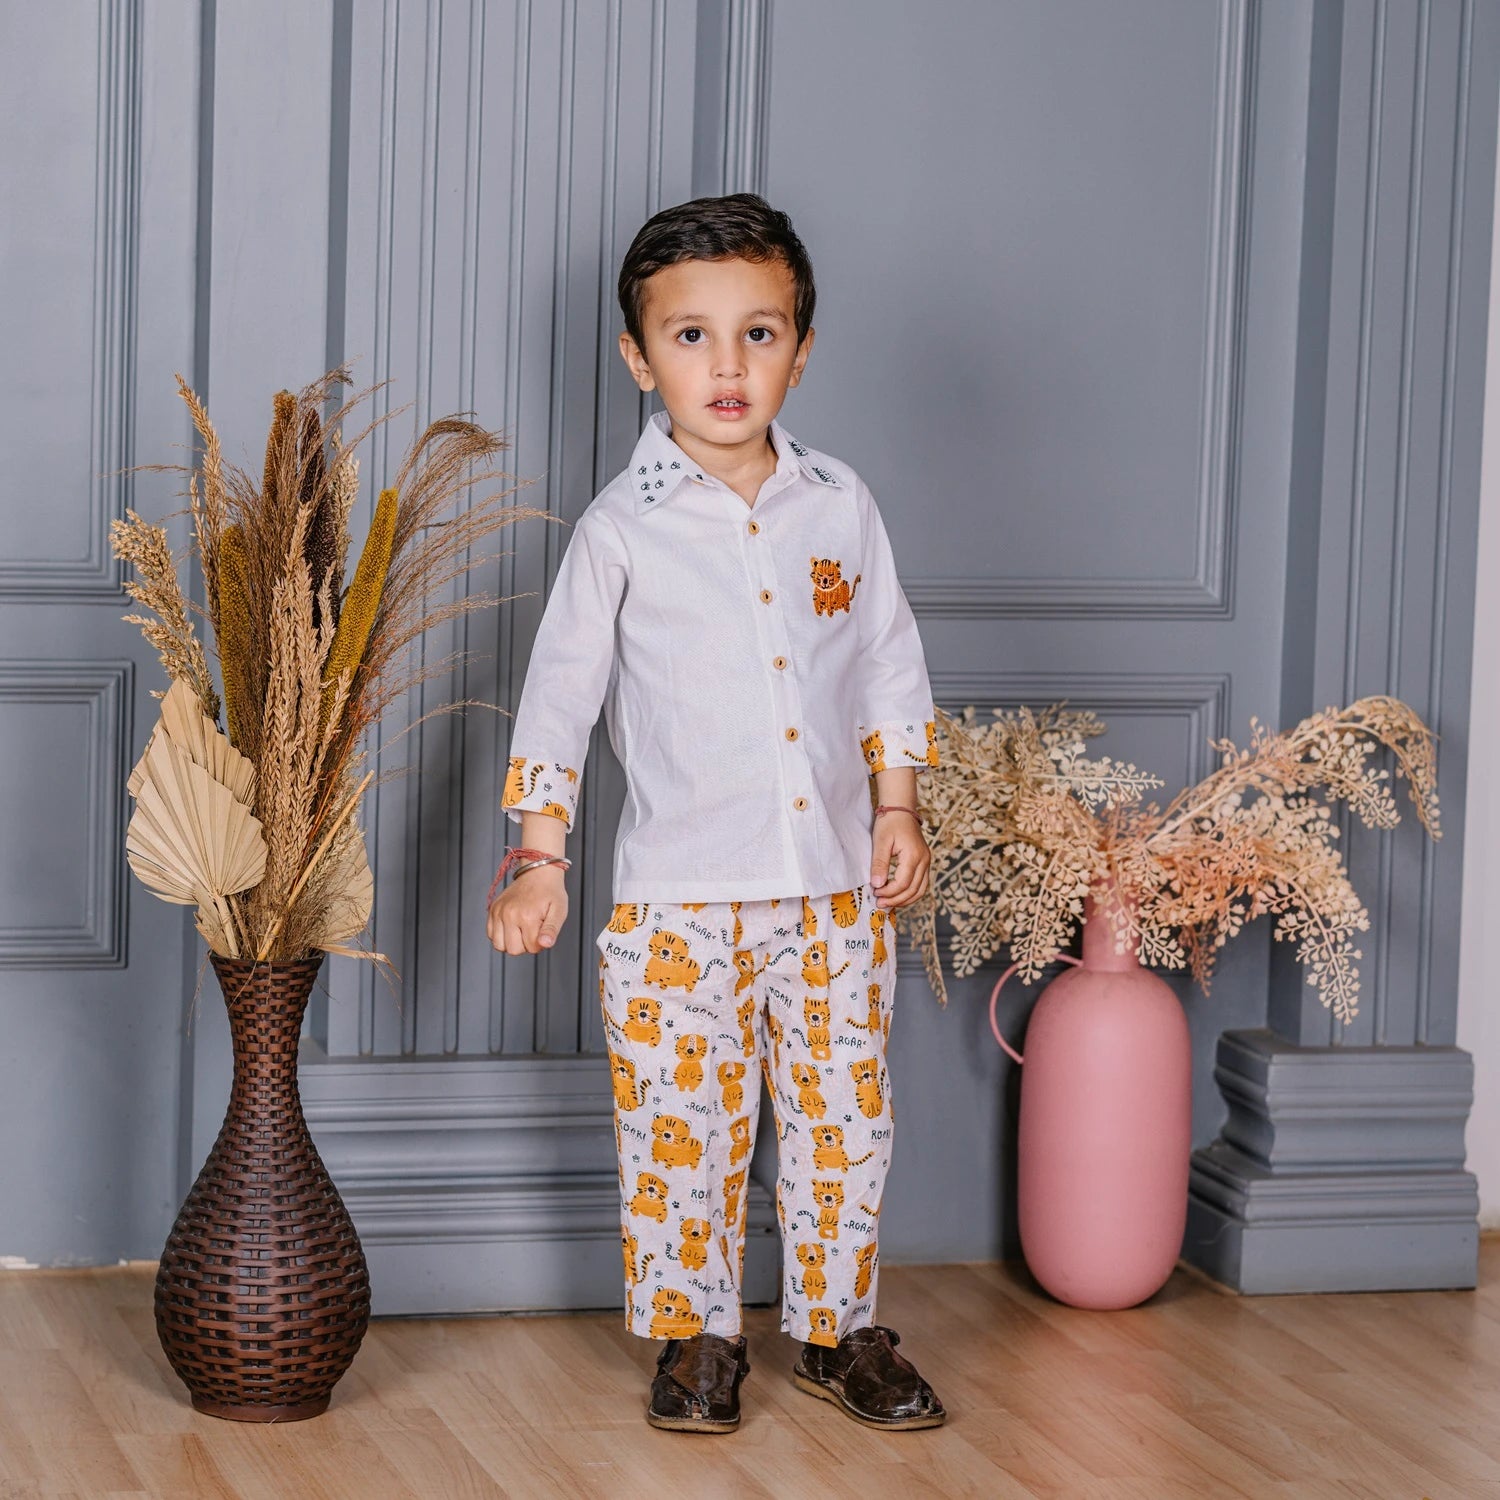 WHITE SHIRT WITH LION EMBROIDERED BROOCH PAIRED WITH LION PRINTED PANTS